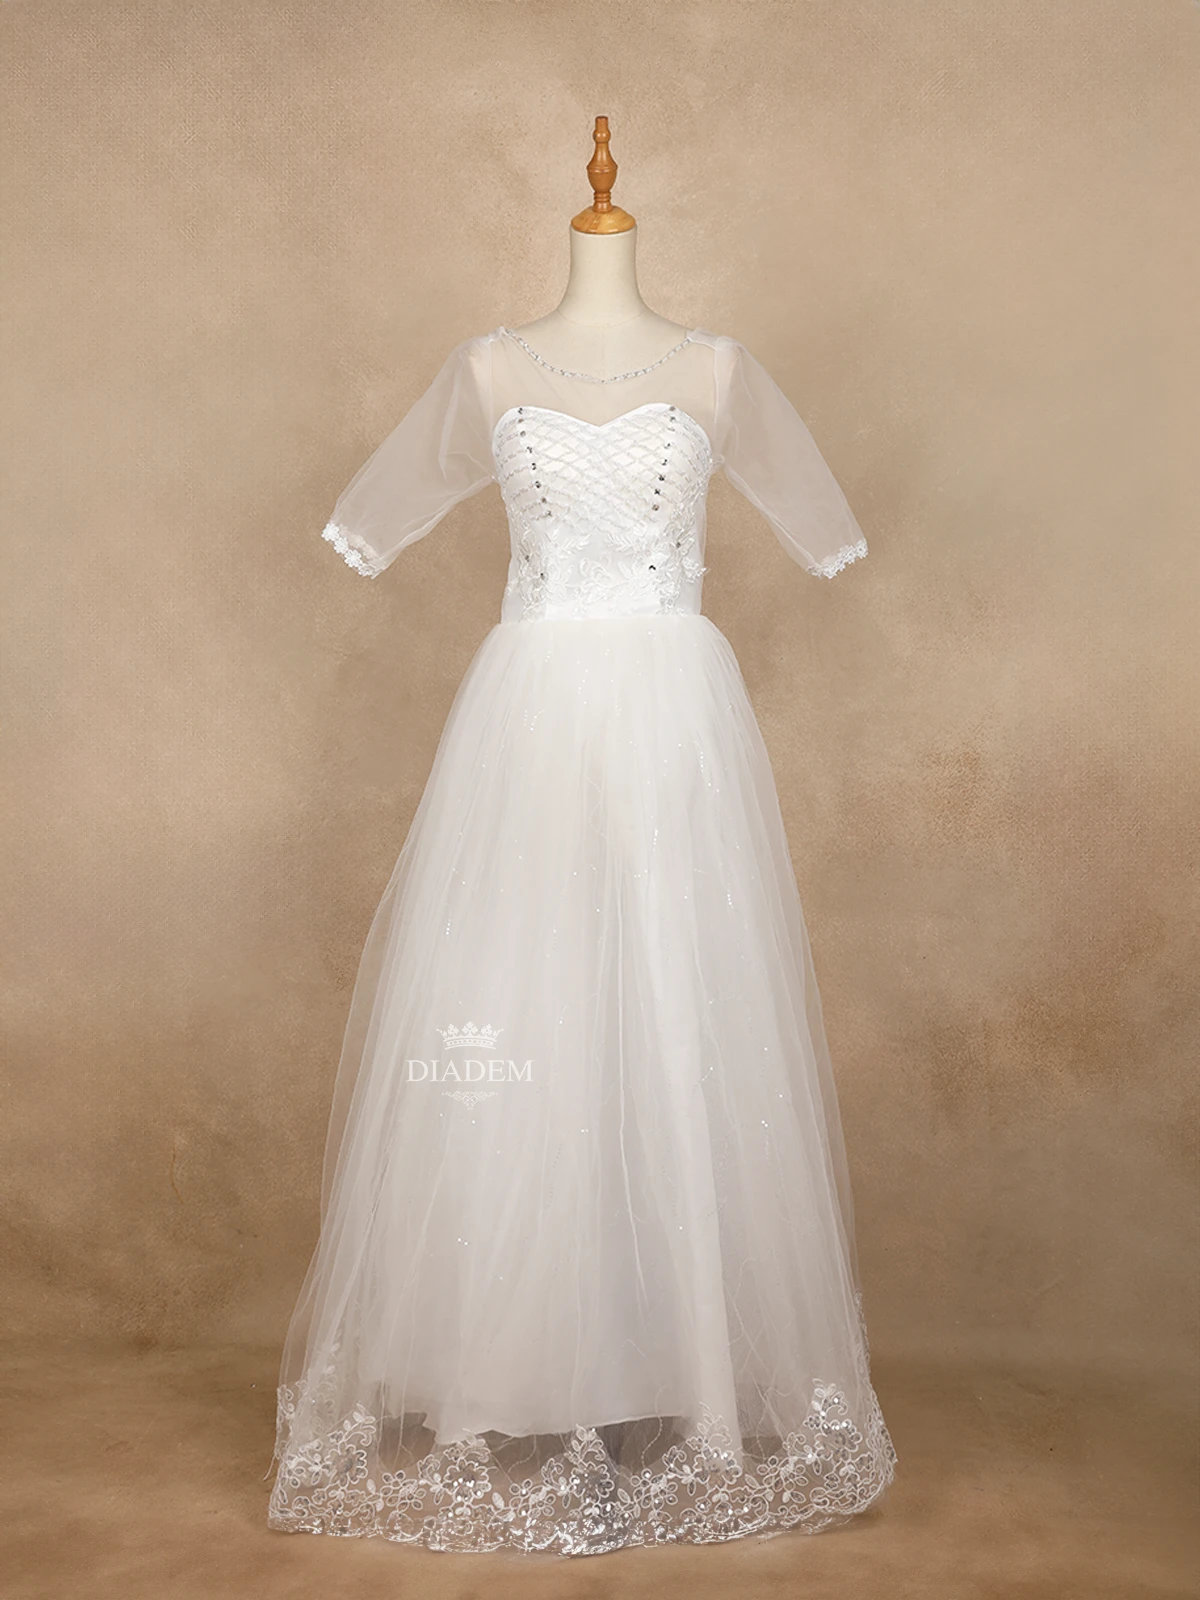 White Wedding Gown Adorned with Floral Design and Criss Cross Beads and Stones